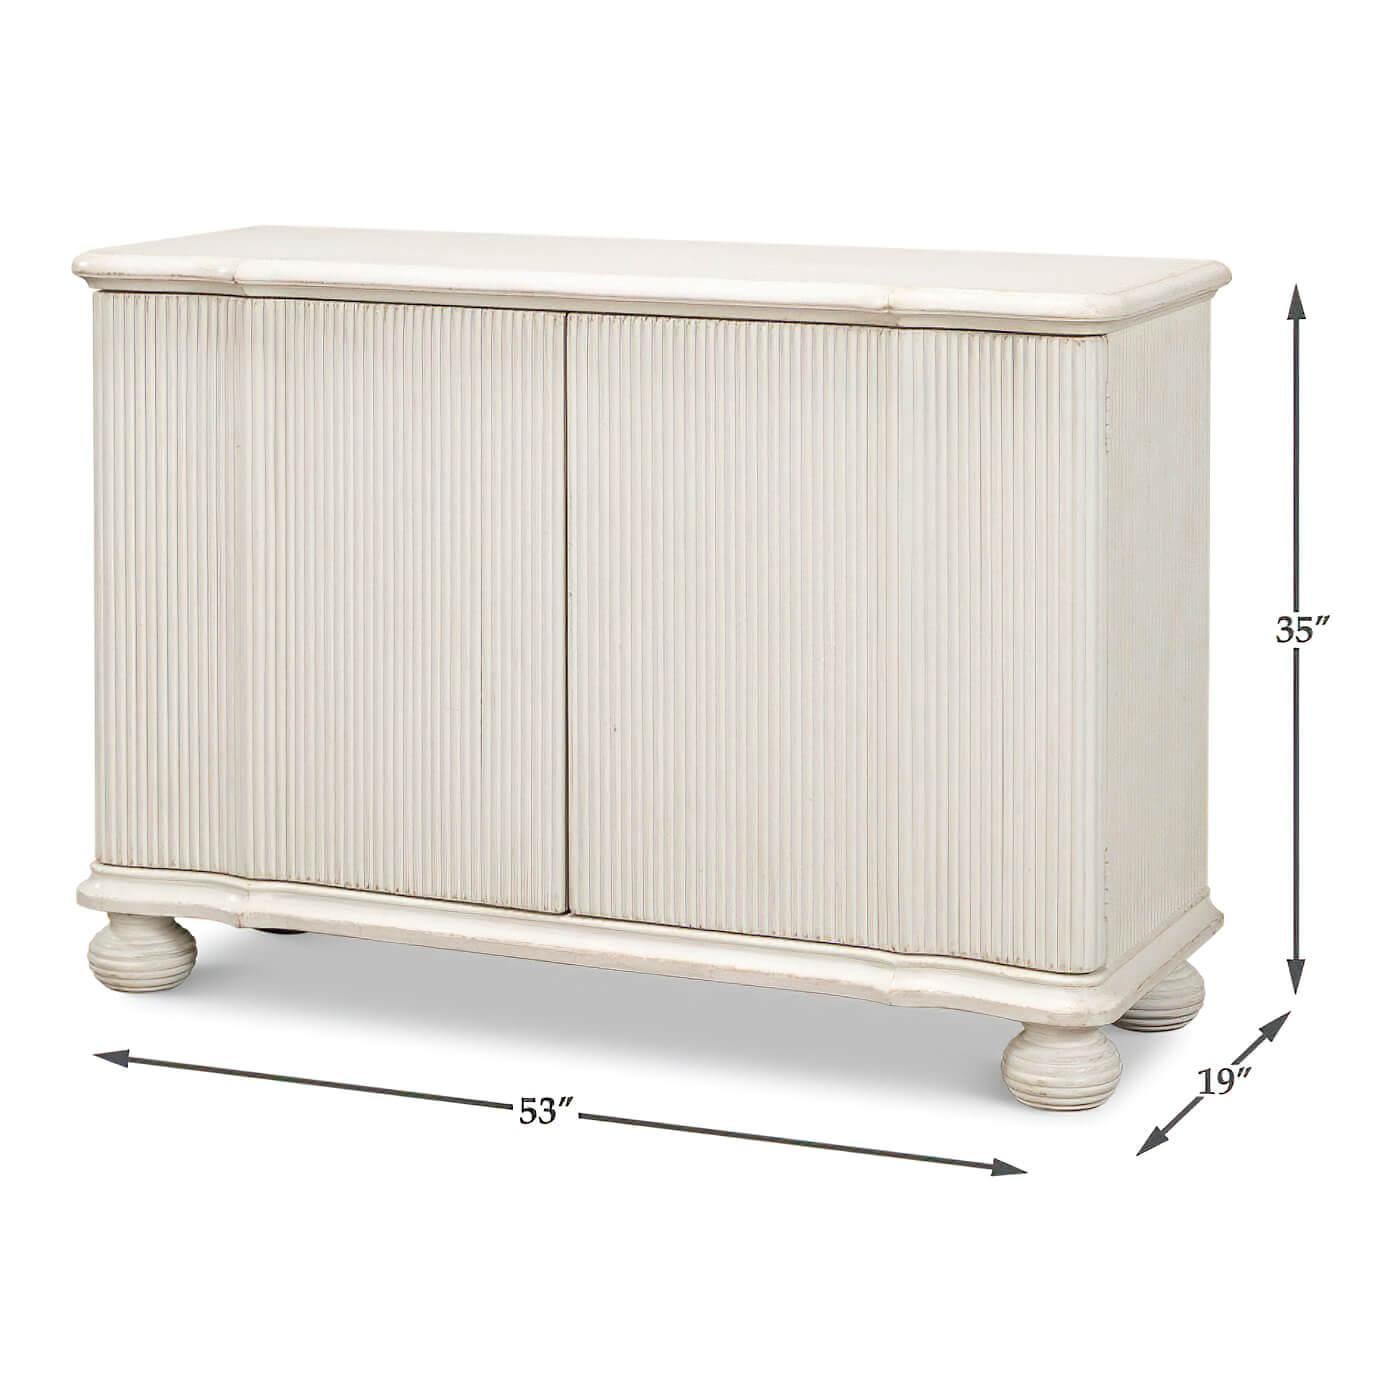 Wood Reeded Antique White Cabinet For Sale